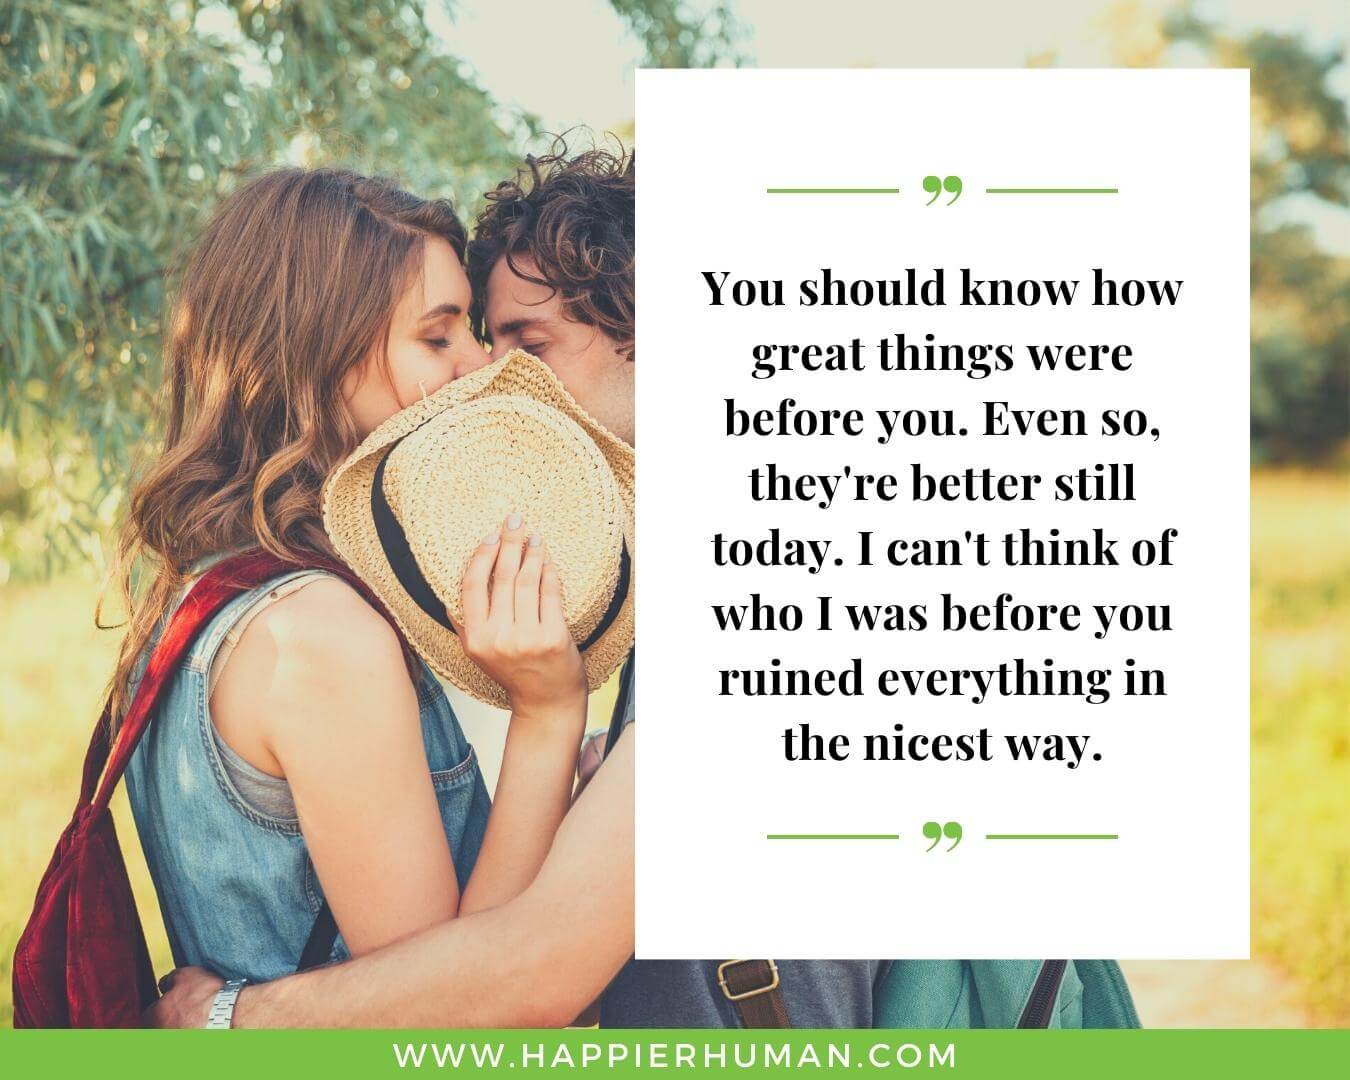 Quotes about love and relationships - “You should know how great things were before you. Even so, they're better still today. I can't think of who I was before you ruined everything in the nicest way.”